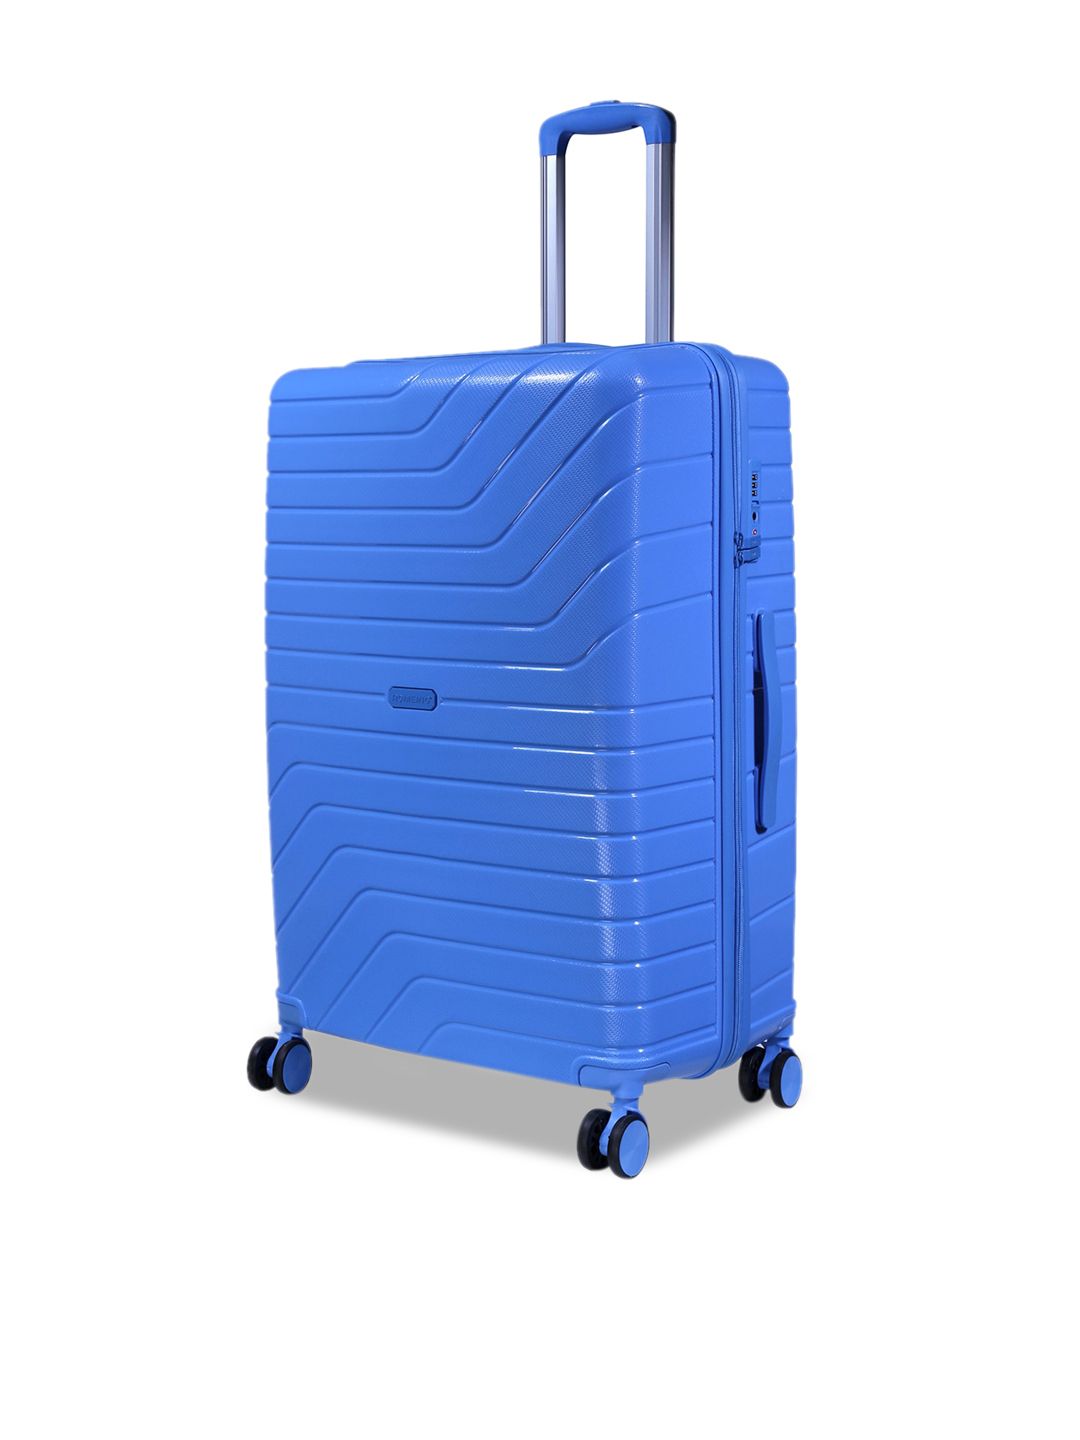 ROMEING Tuscany Blue Textured Hard-Sided Large Polypropylene Trolley Suitcase Price in India